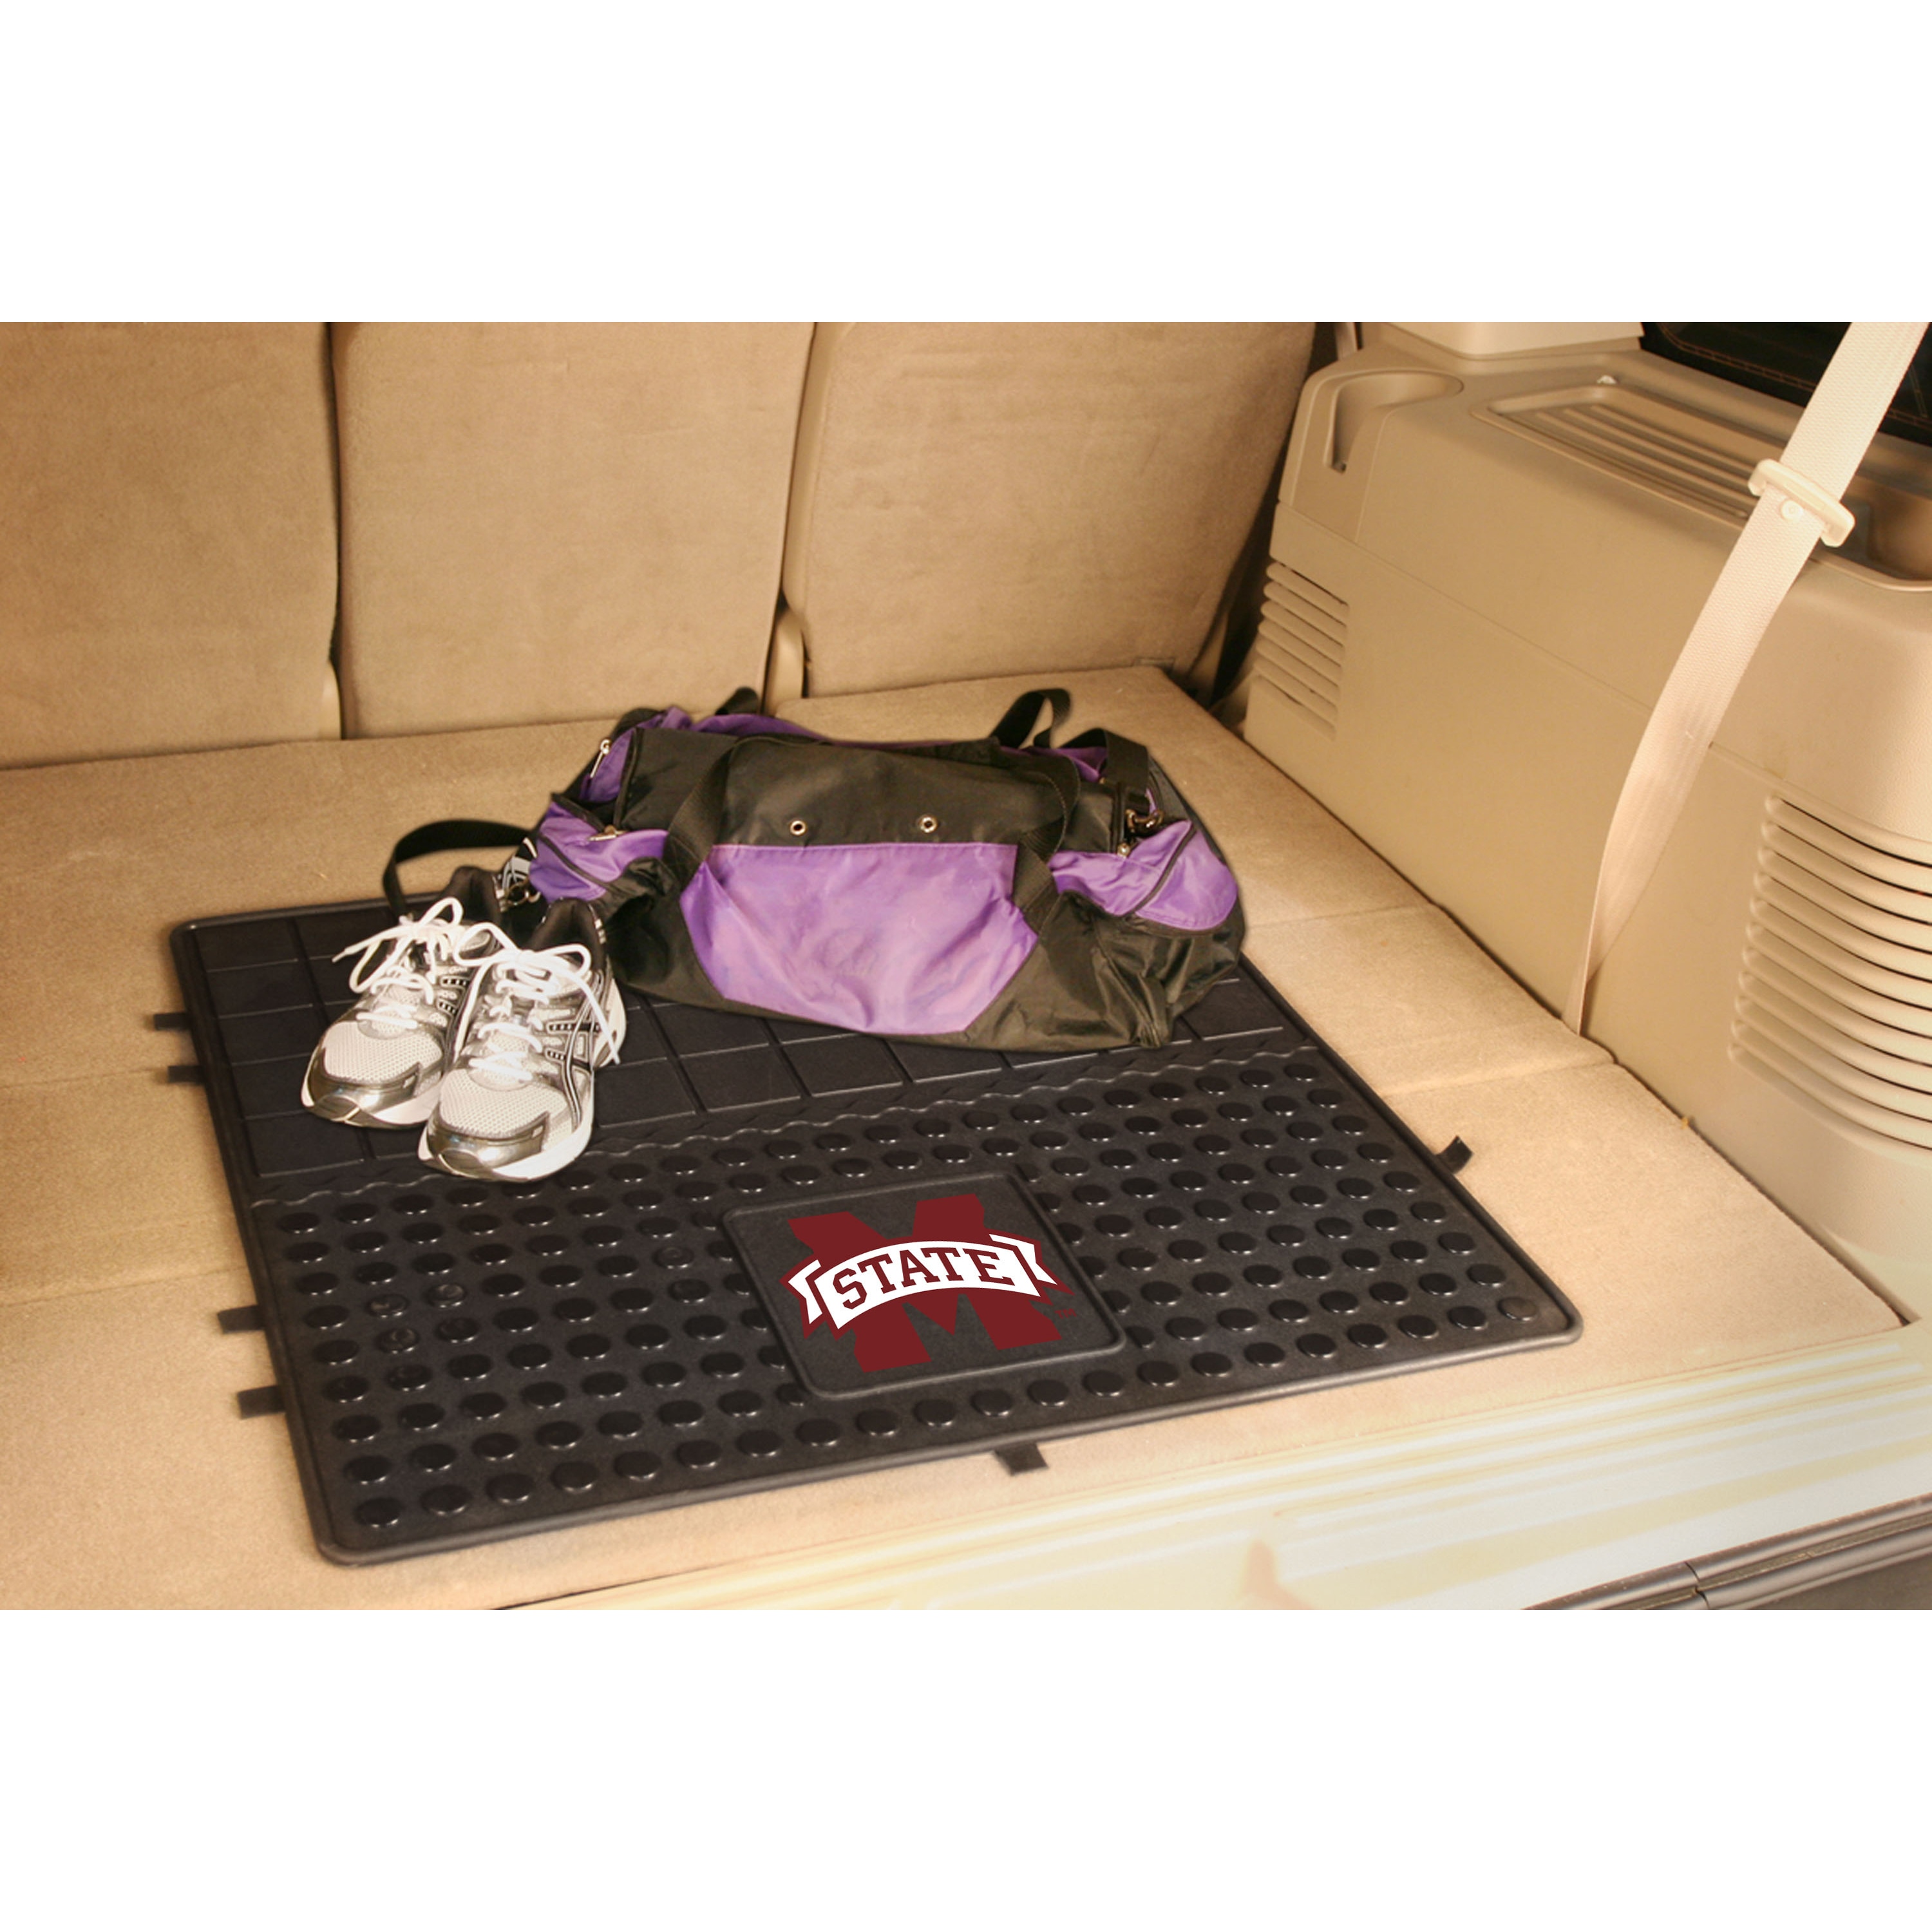 Fanmats Mississippi State Heavy Duty Vinyl Cargo Mat (100 percent vinylDimensions 31 inches high x 31 inches wide)